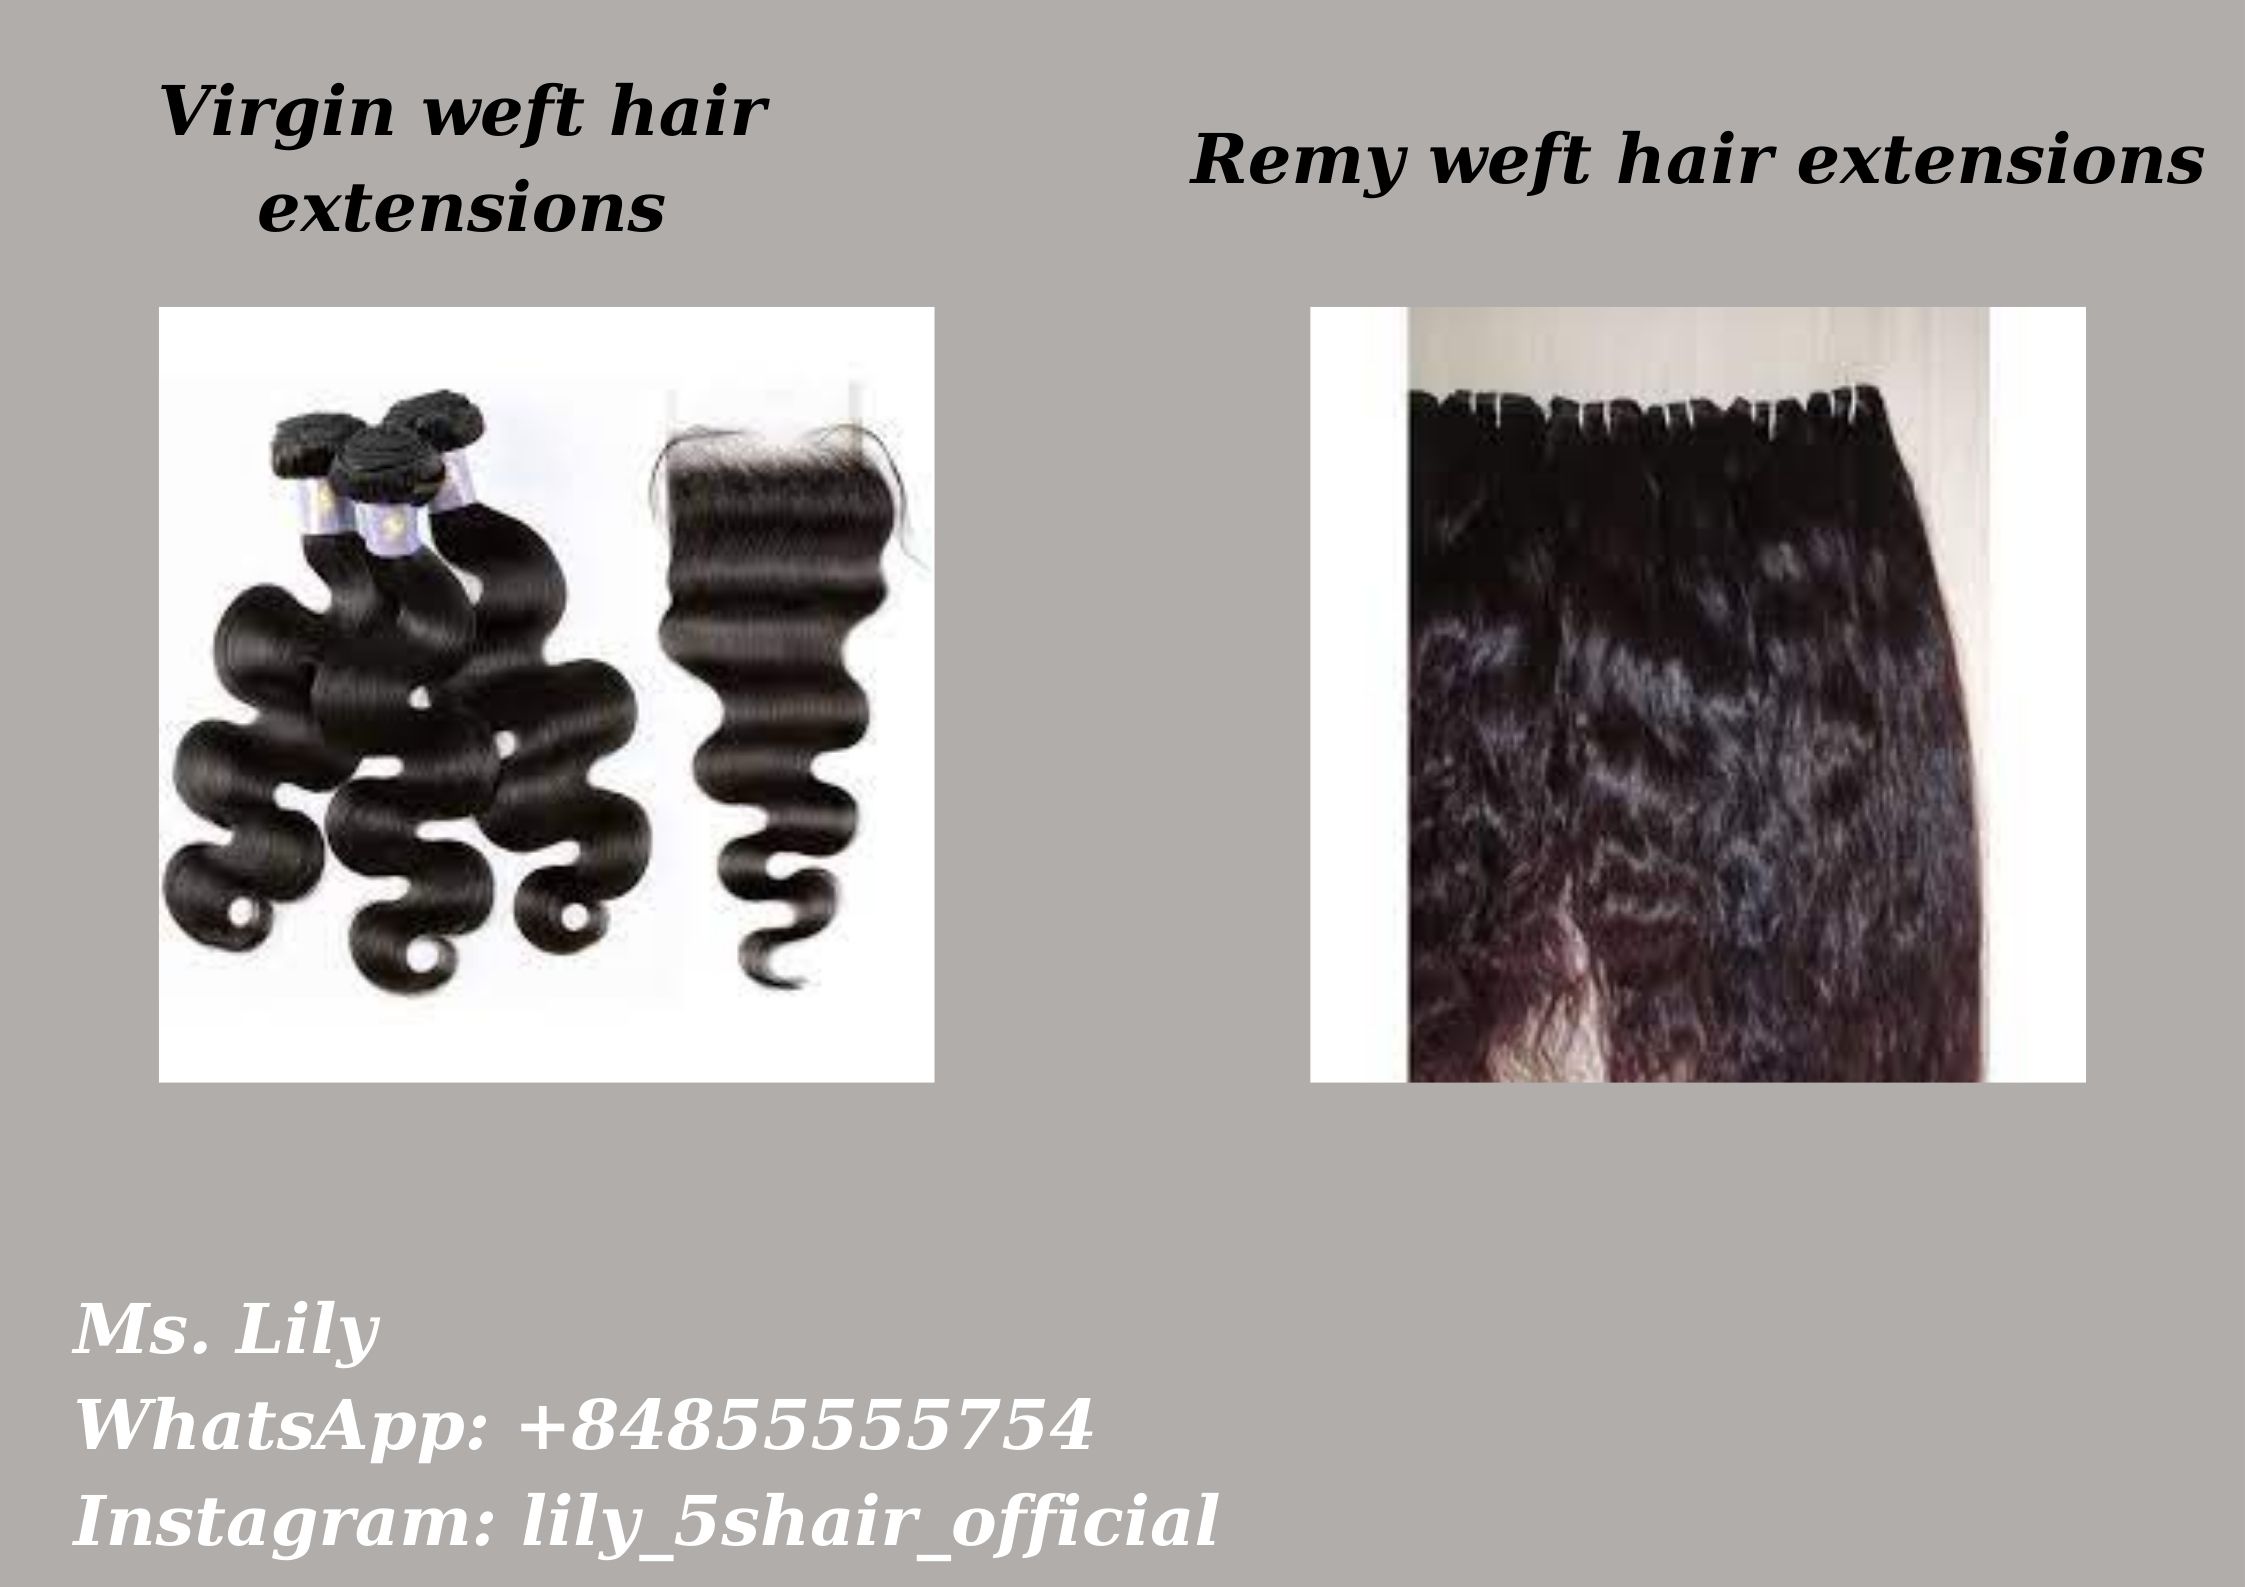 weft-hair-extension-products-never-go-fashion-1